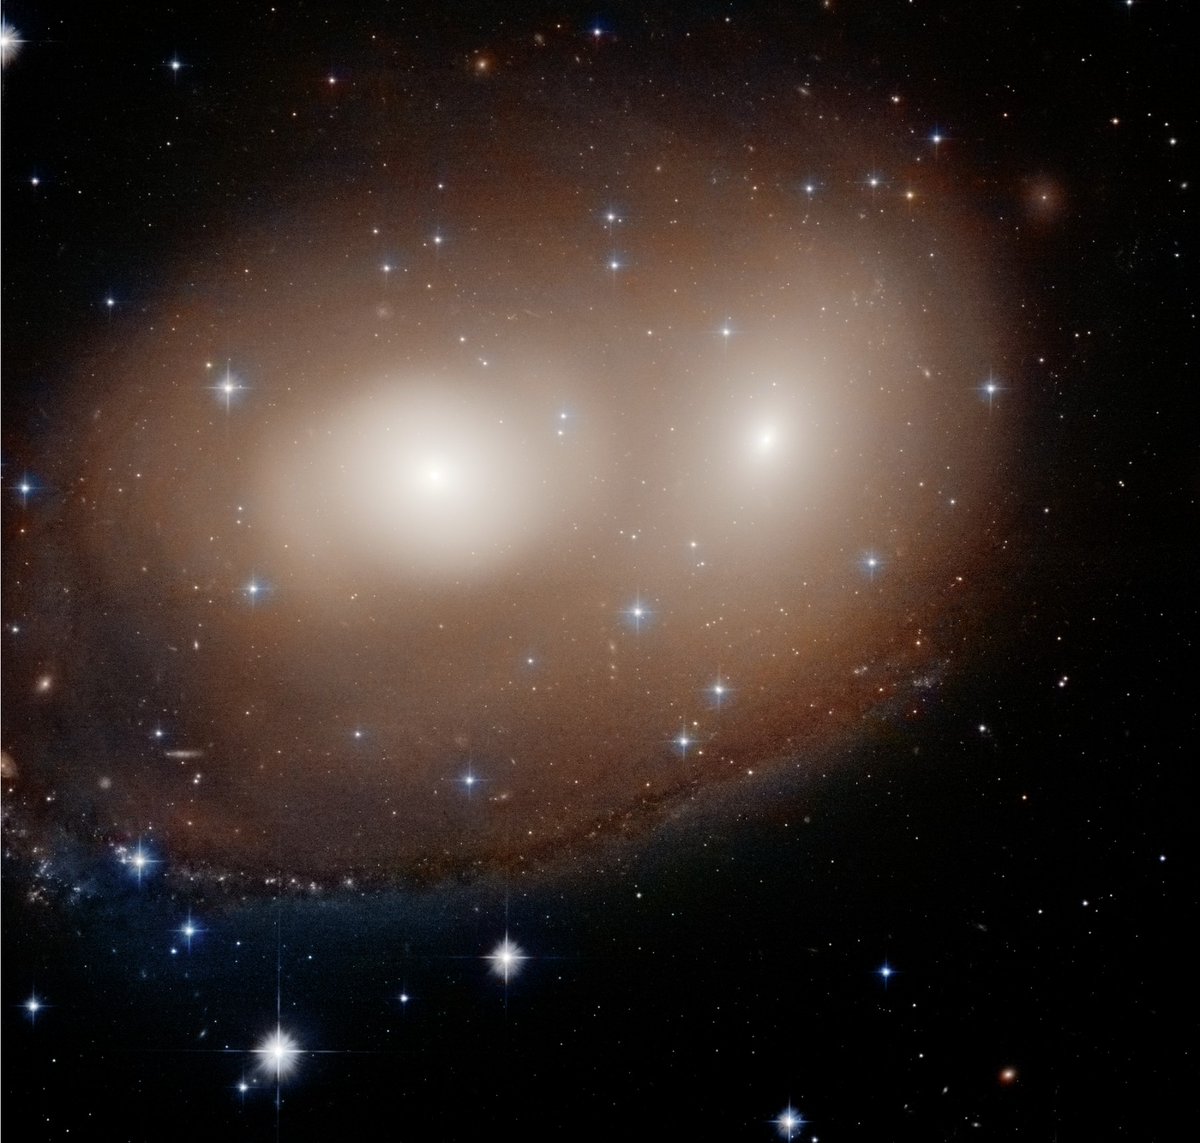 This pair of galaxies, NGC 2292 and NGC 2293, is beginning to collide, which has started the formation of new stars. These new stars appear like blue pearls in the dusty arm along the bottom. Discover more about their interaction: bit.ly/3TK5wru